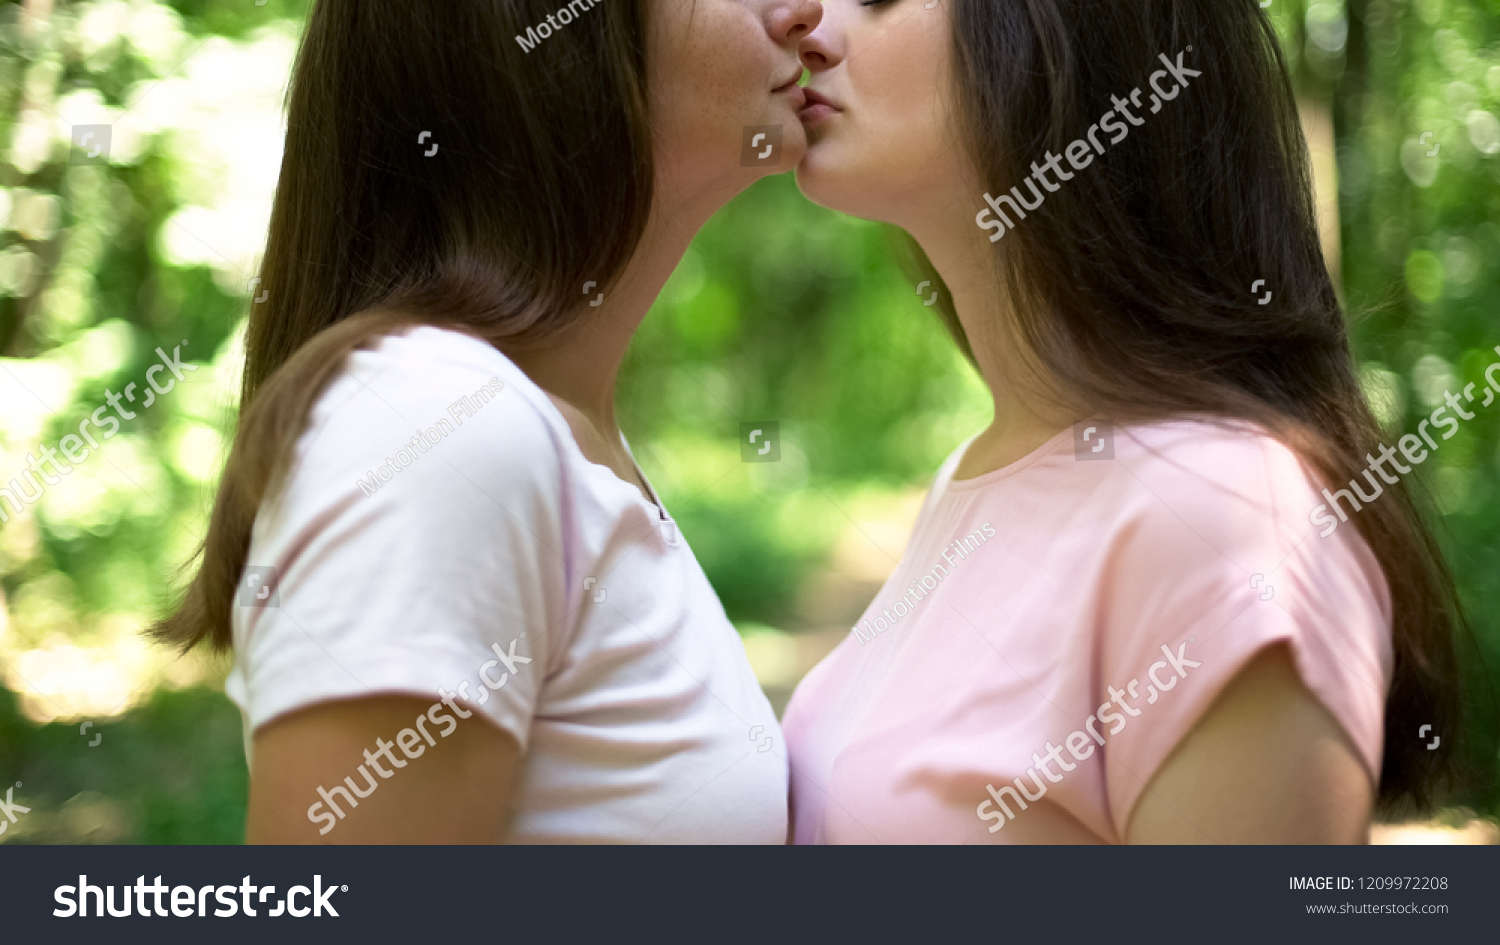 Lesbians Maiking Out